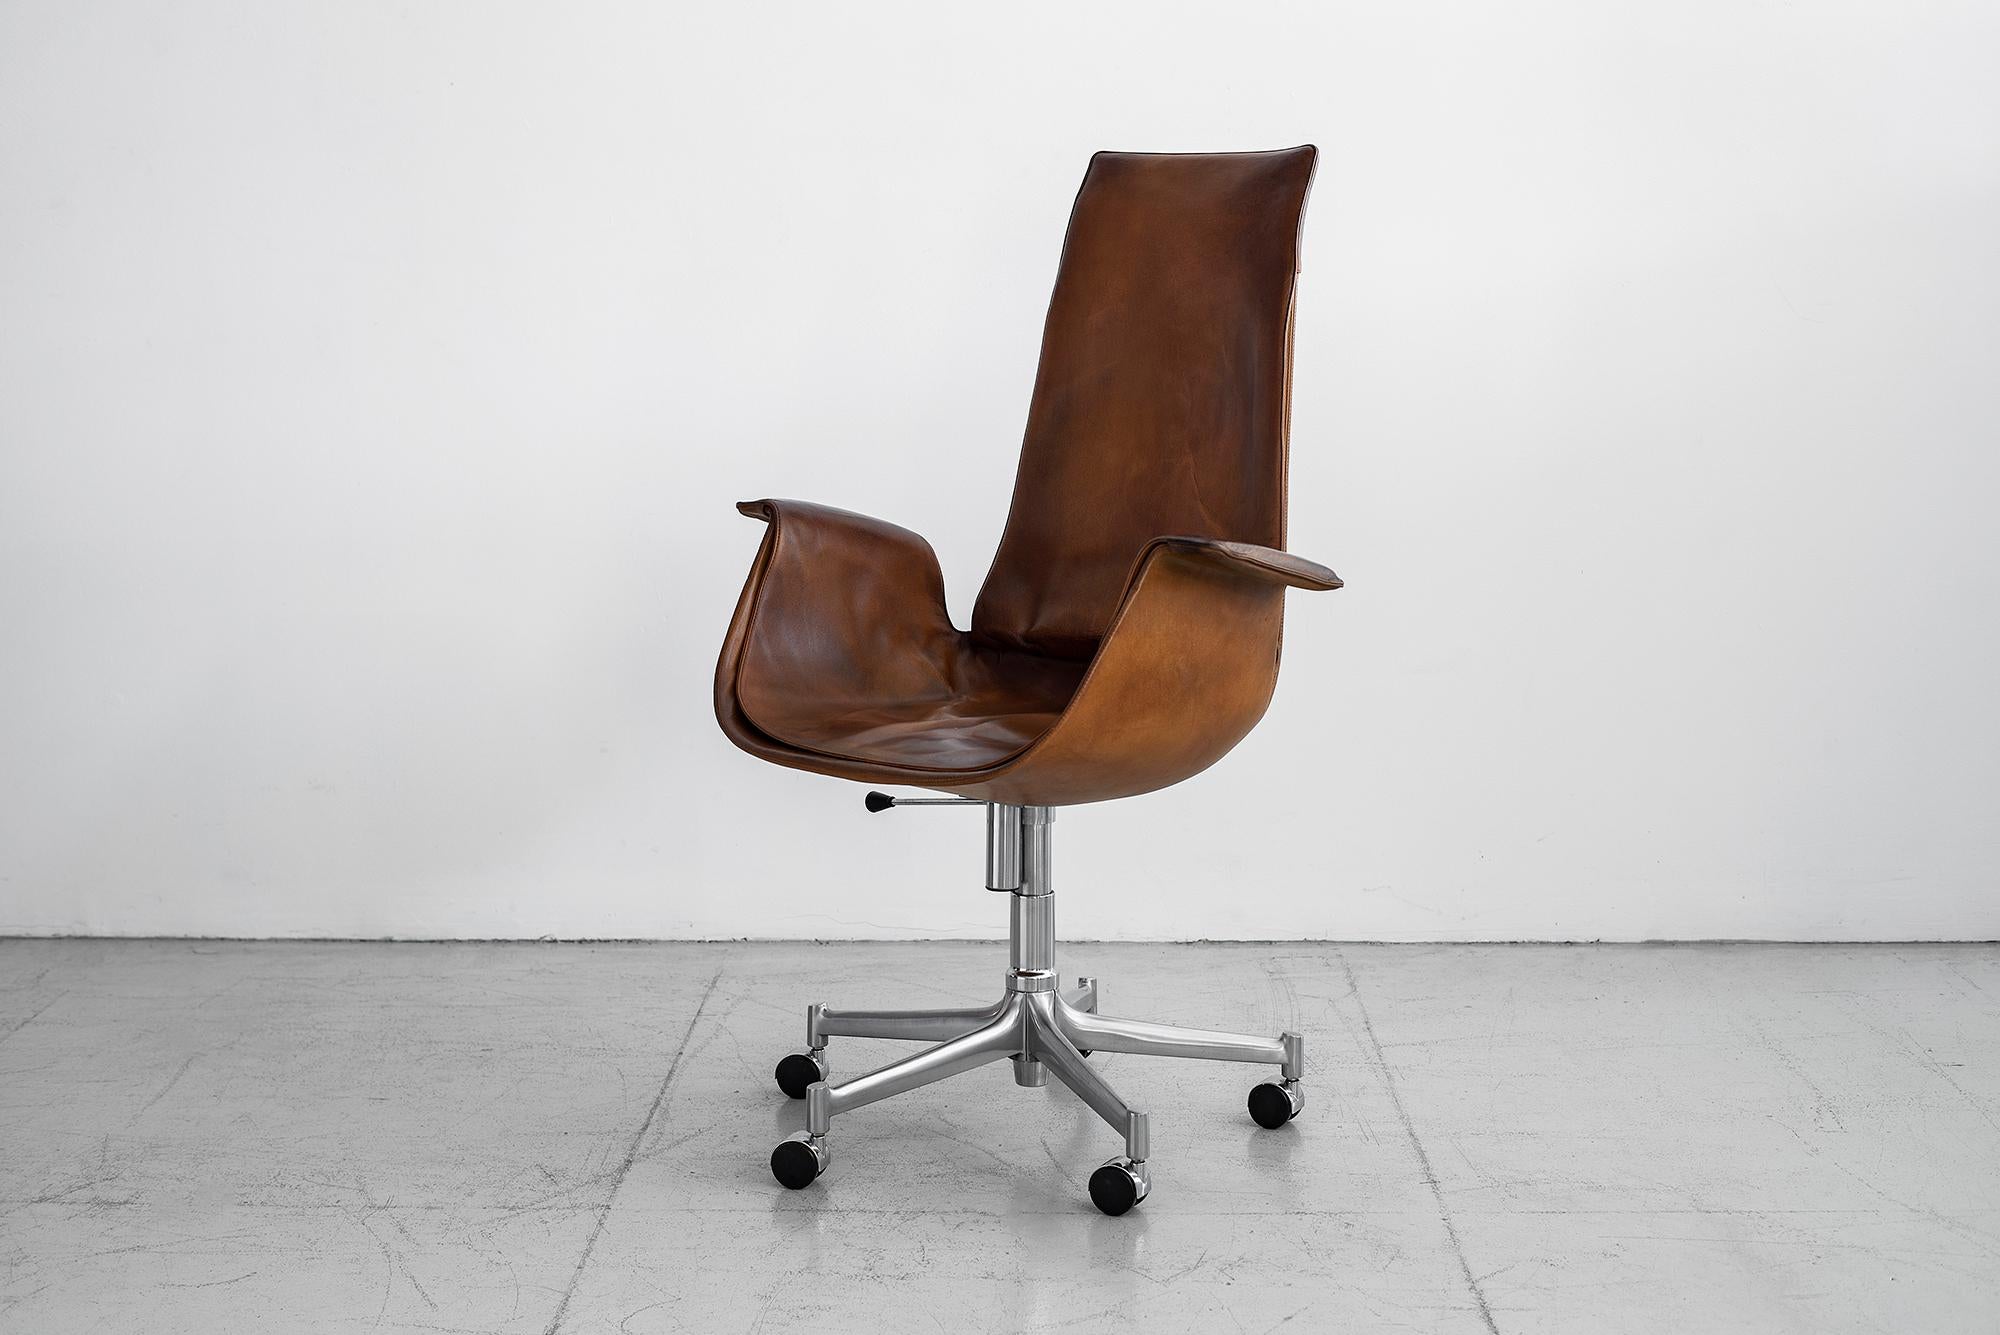 Classic Preben Fabricius bird office chair with 5 star rolling base and casters.
Carmel brown leather maintains wonderful patina. Swivels and rolls well on original casters. Additional chair in black also available.